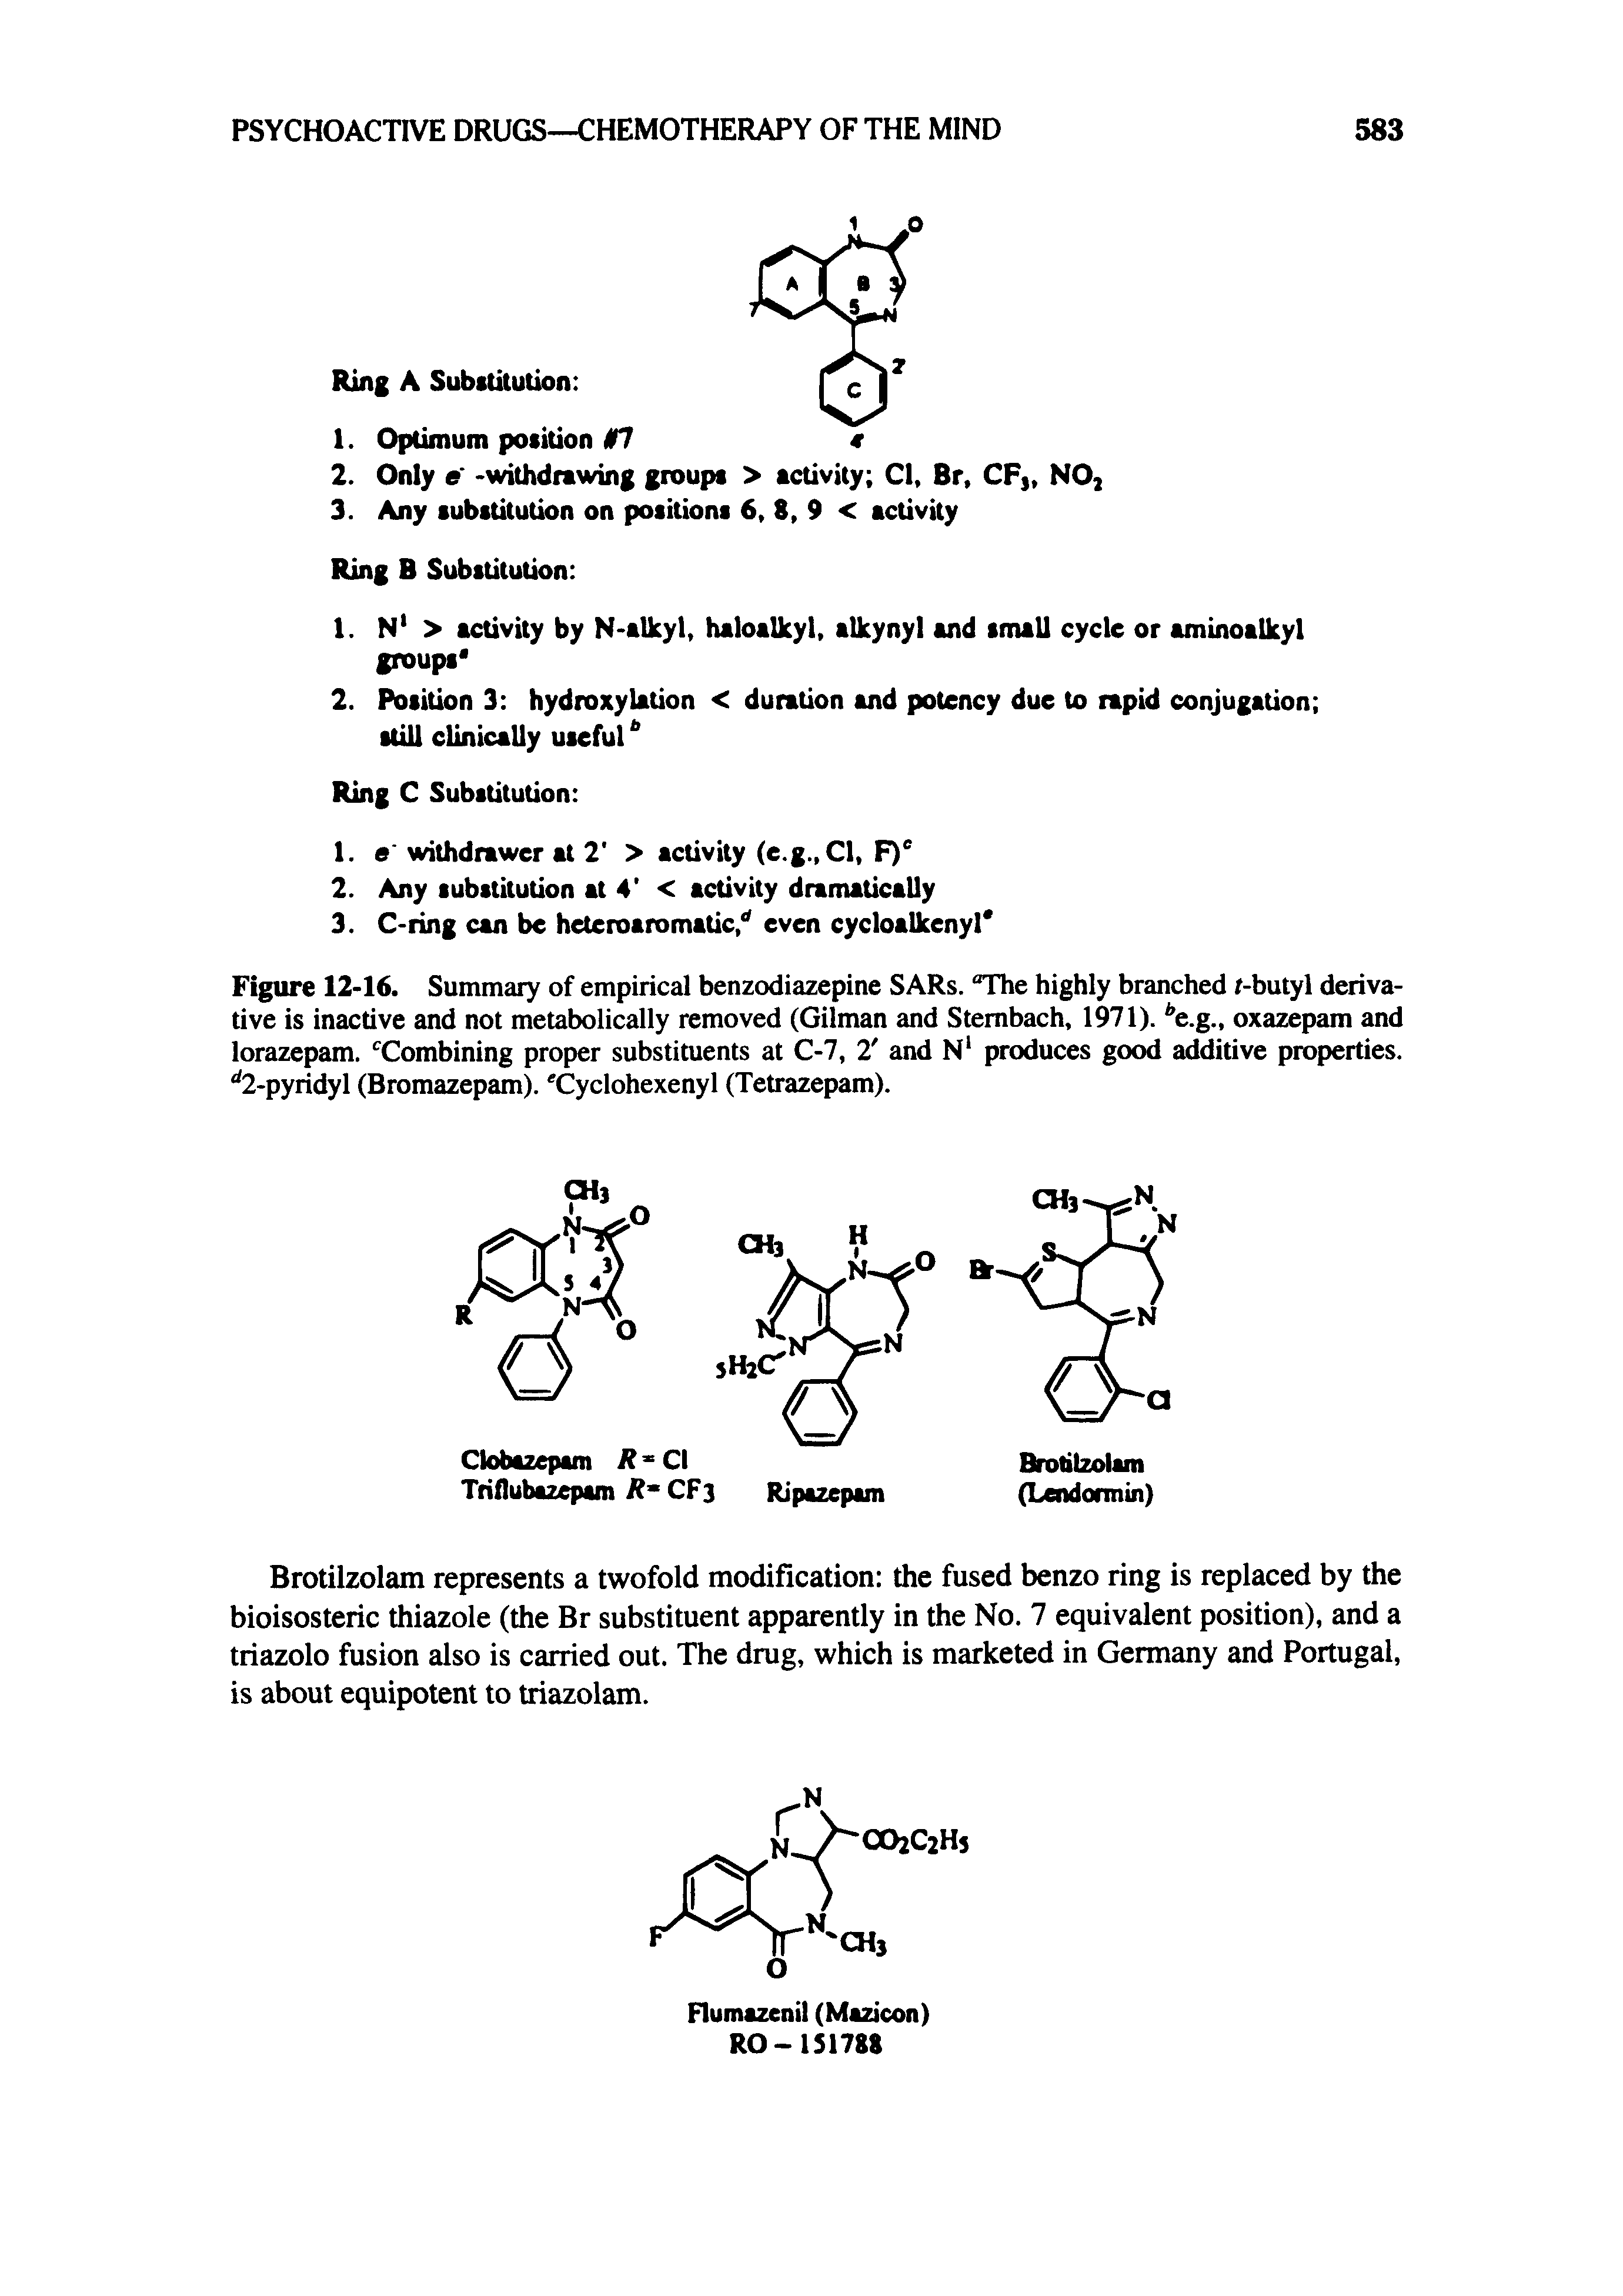 Figure 12-16. Summary of empirical benzodiazepine SARs. The highly branched /-butyl derivative is inactive and not metabolically removed (Gilman and Stembach, 1971). e.g., oxazepam and lorazepam. Combining proper substituents at C-7, 2 and N1 produces good additive properties. d2-pyridyl (Bromazepam). Cyclohexenyl (Tetrazepam).